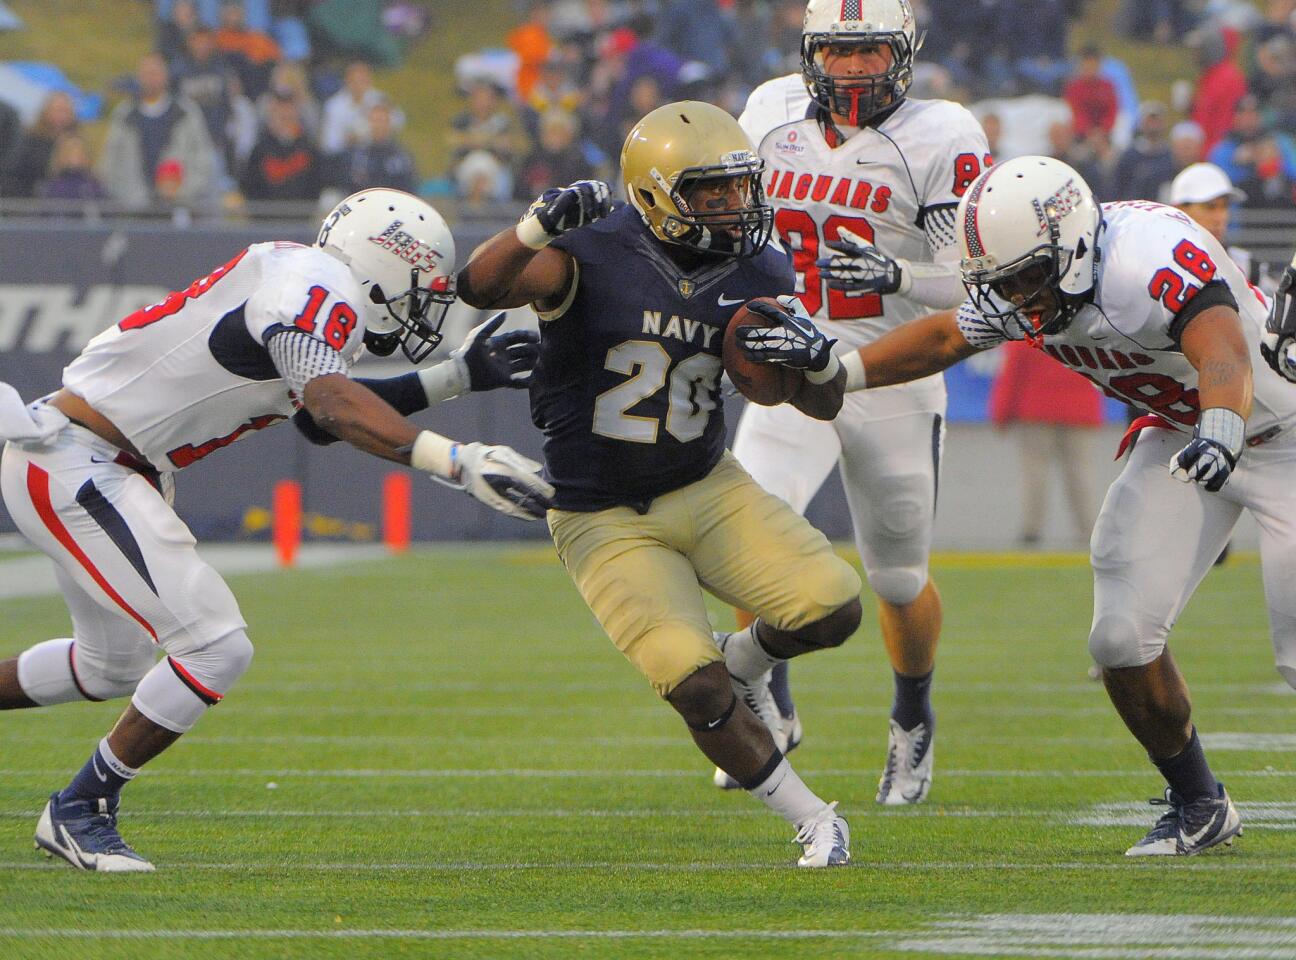 South Alabama's Terrell Brigham (18) and Enrique Williams (28) close in on Navy's Darius Staten (20).